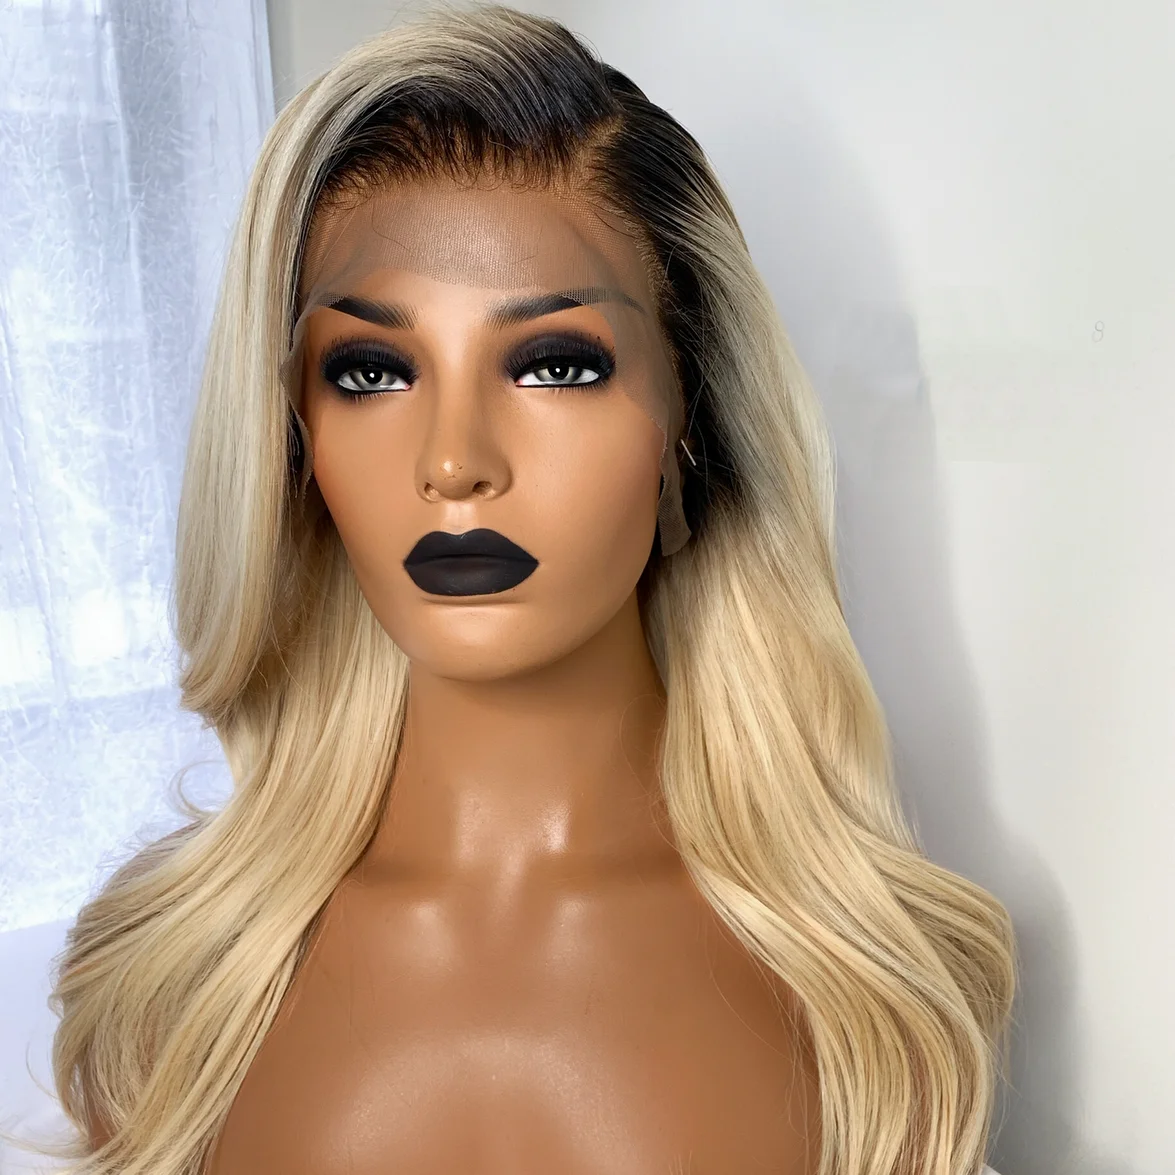 Malaysian Virgin Hair 1b Roots 613 Ombre Blond Able To Dye To Any Color ...